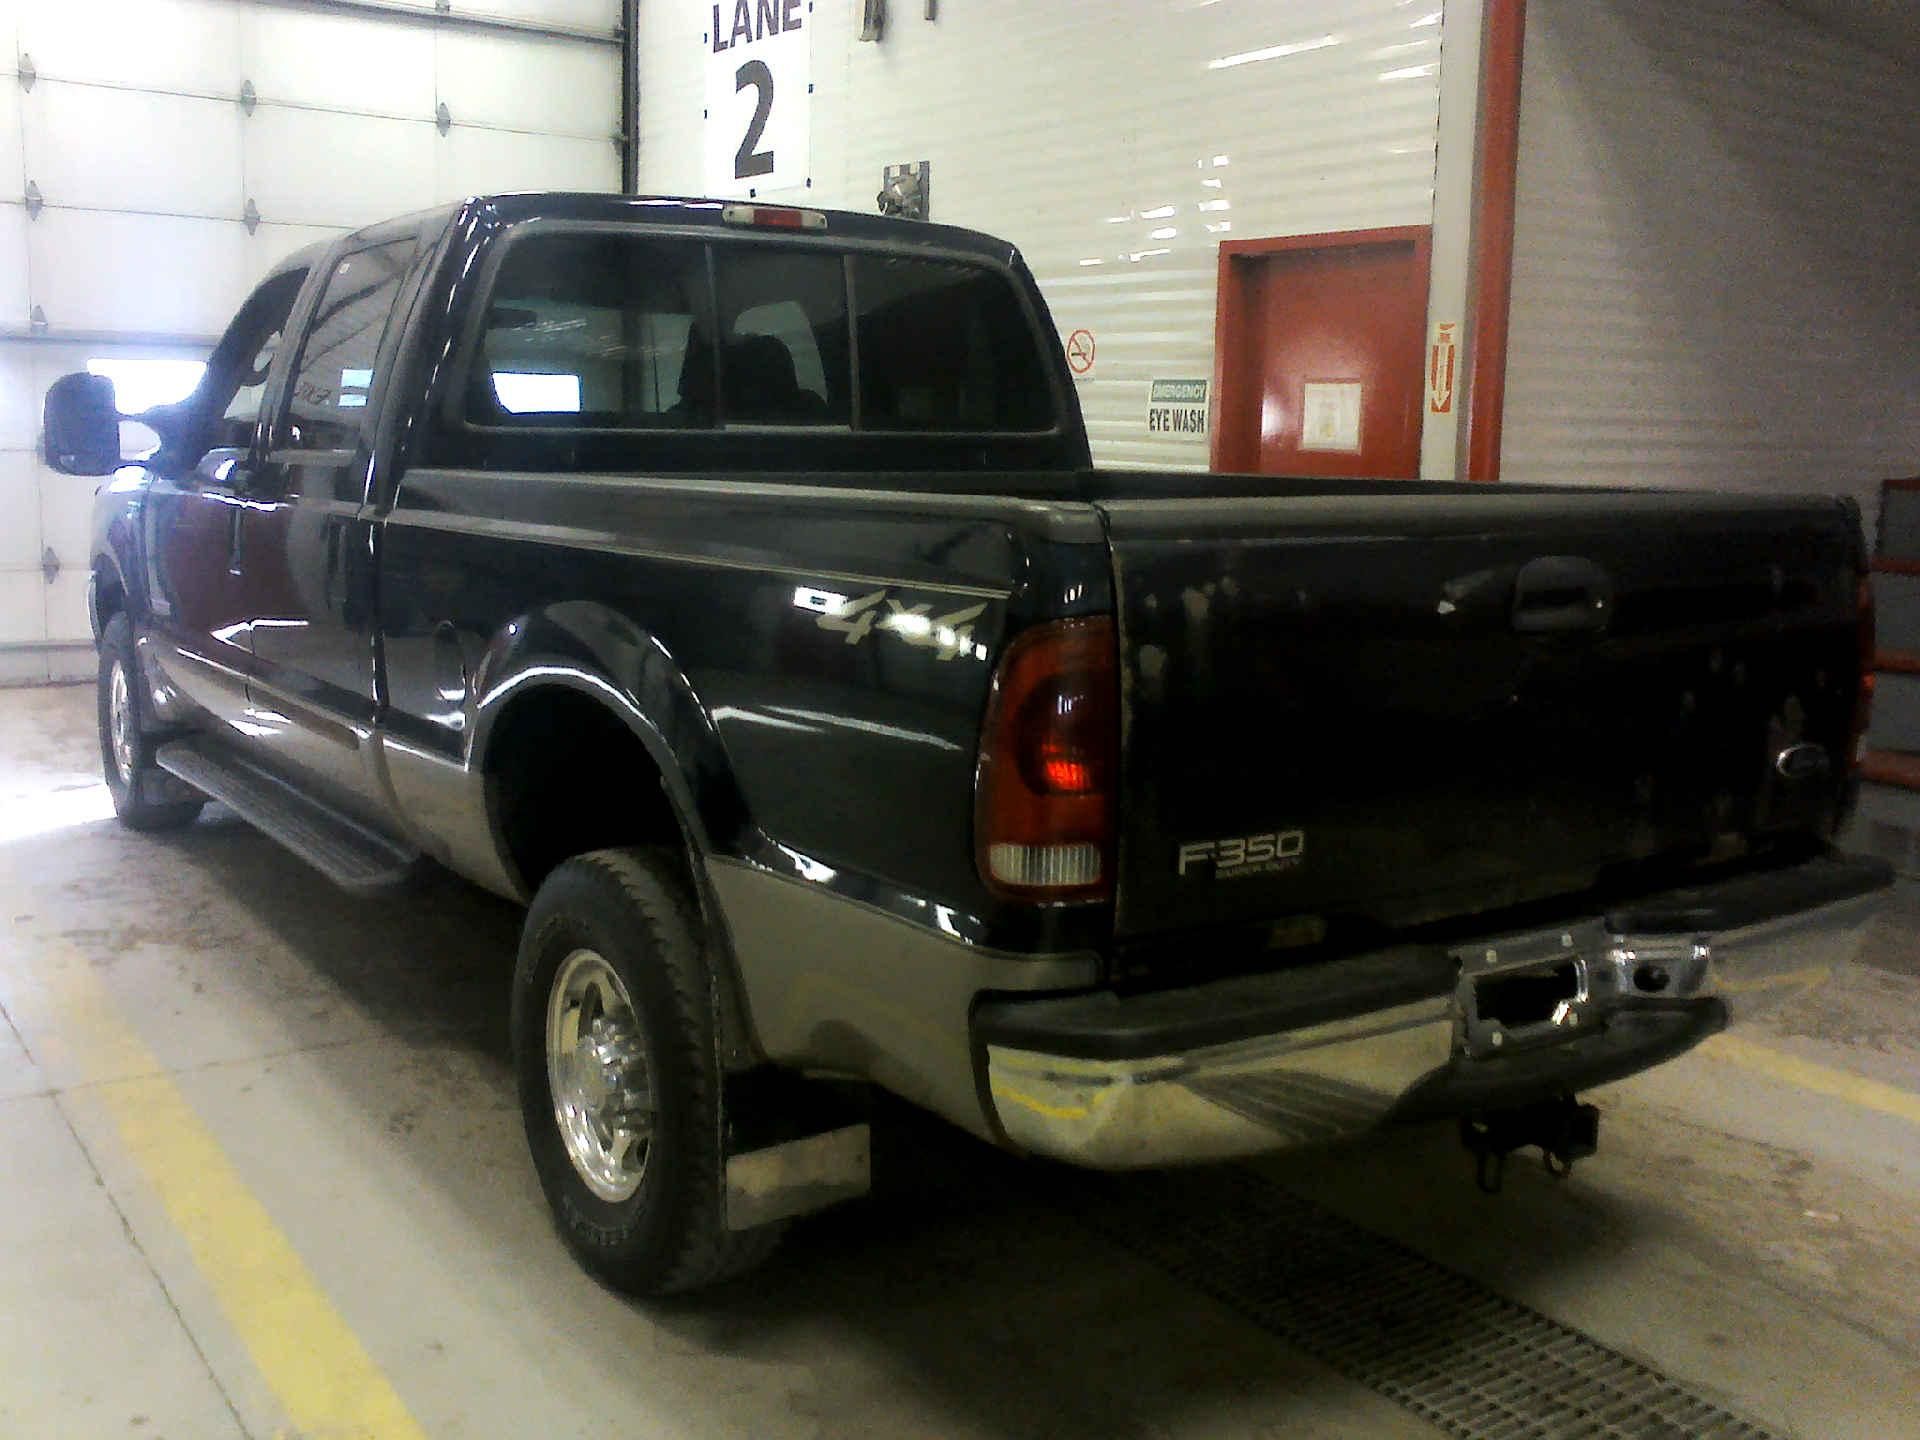 2003 FORD F-350 SD LARIAT CREW CAB 4WD 6.0L V8 OHV 32V TURBO DIESEL AUTOMATIC SN:1FTSW31P43ED70797 - Image 2 of 9